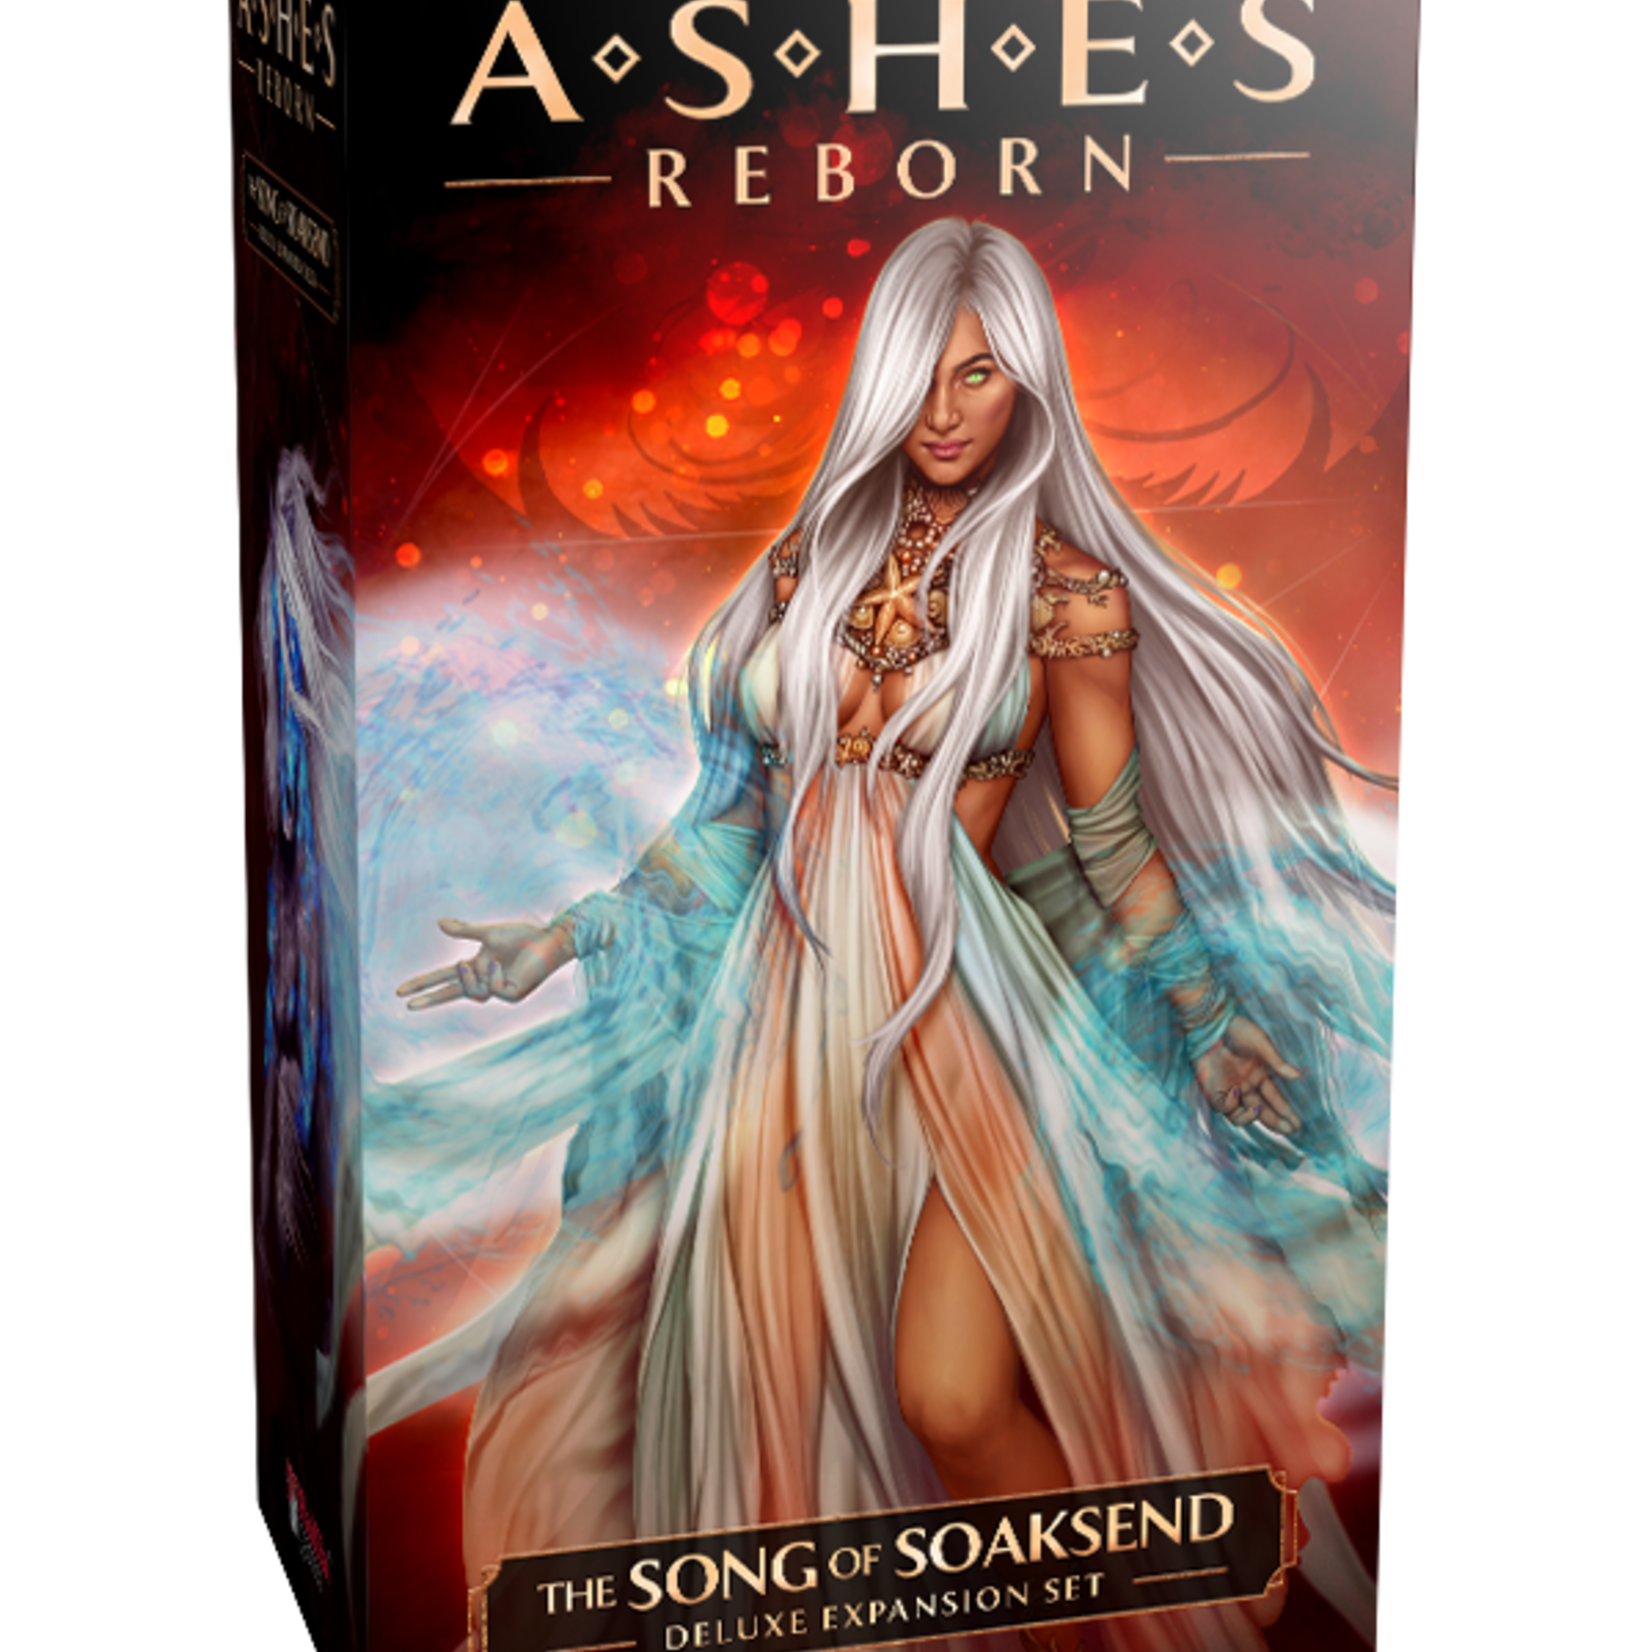 Plaid Hat Games Ashes: Reborn - The Song of Soaksend Deluxe Expansion Set